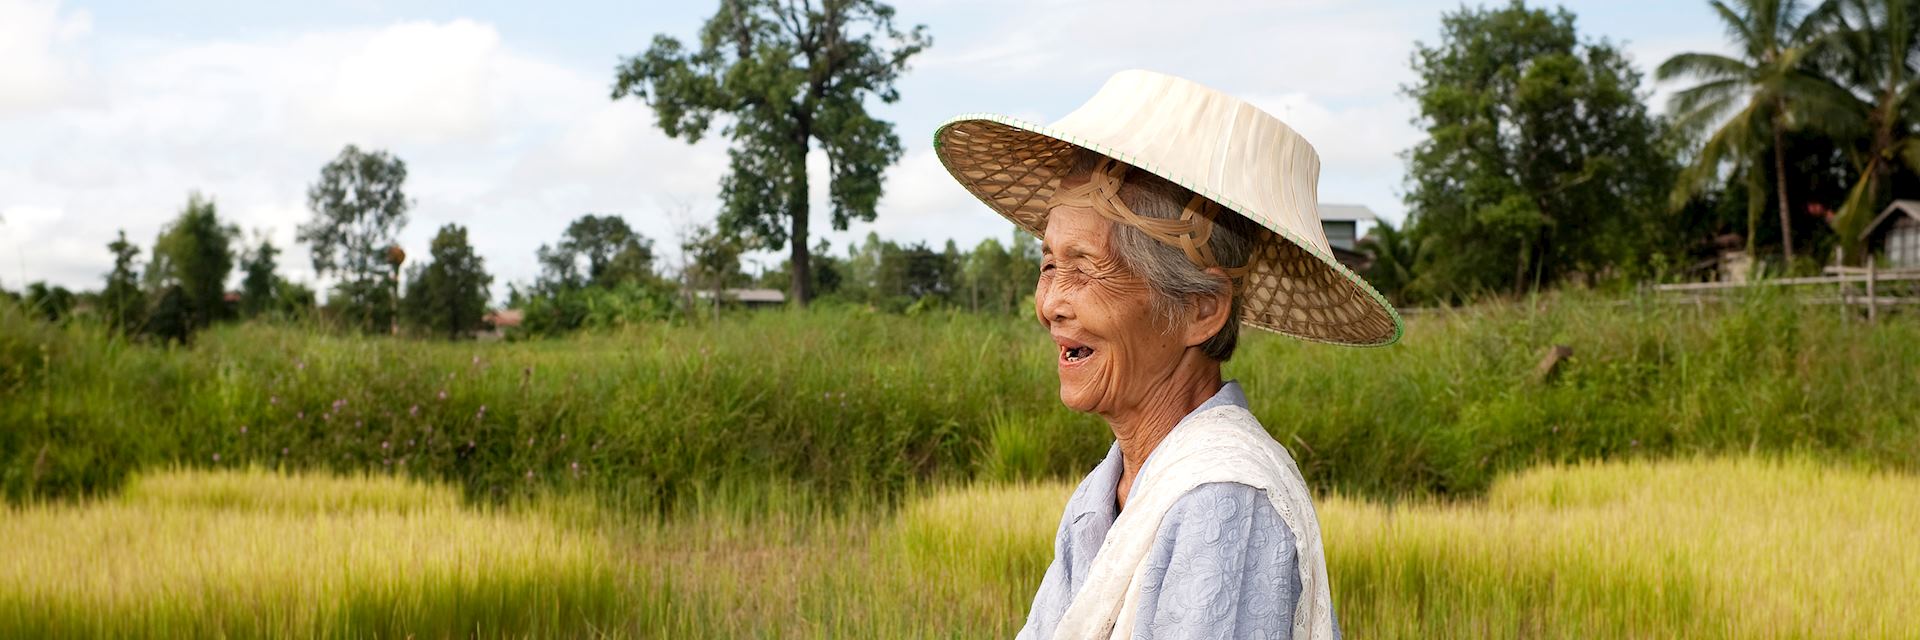 local woman working in a rice field, Thailand